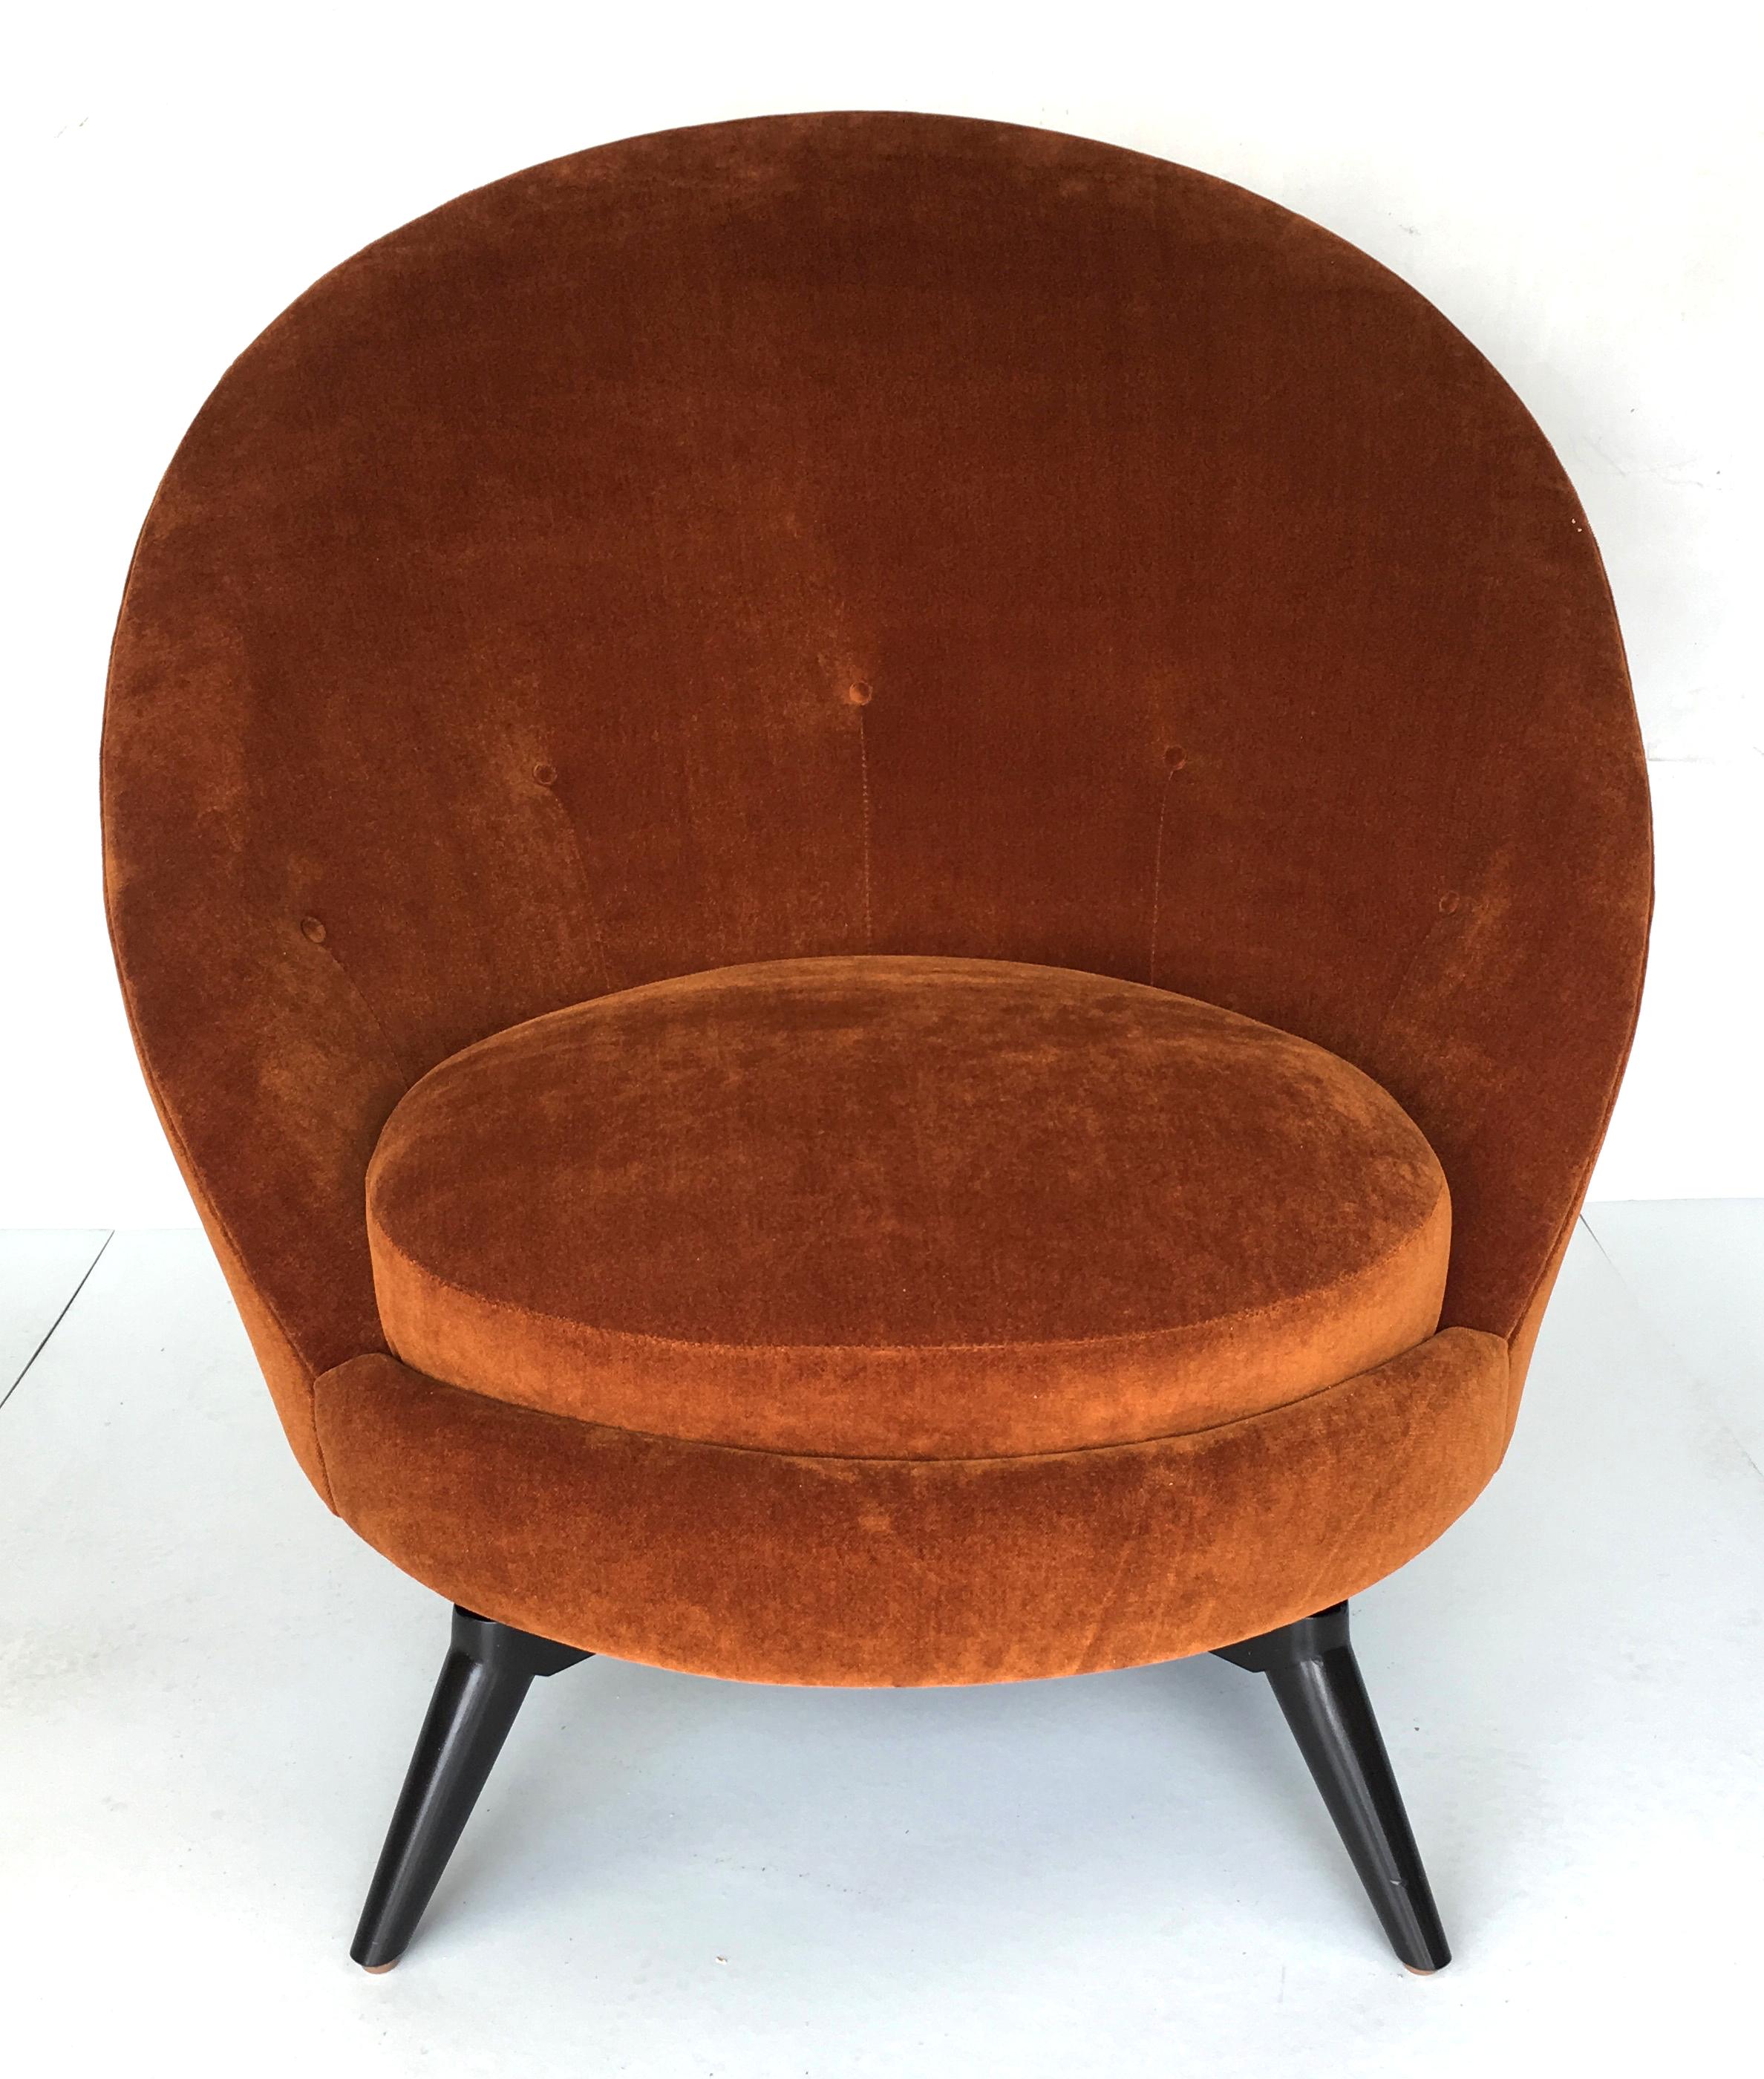 Swivel chairs in the French midcentury style. These super stylish and versatile chairs are as comfortable as they look. Dacron and foam over webbed and sprung seats, and newly engineered bases with 360 steel swivel plates. The swivel bases have been